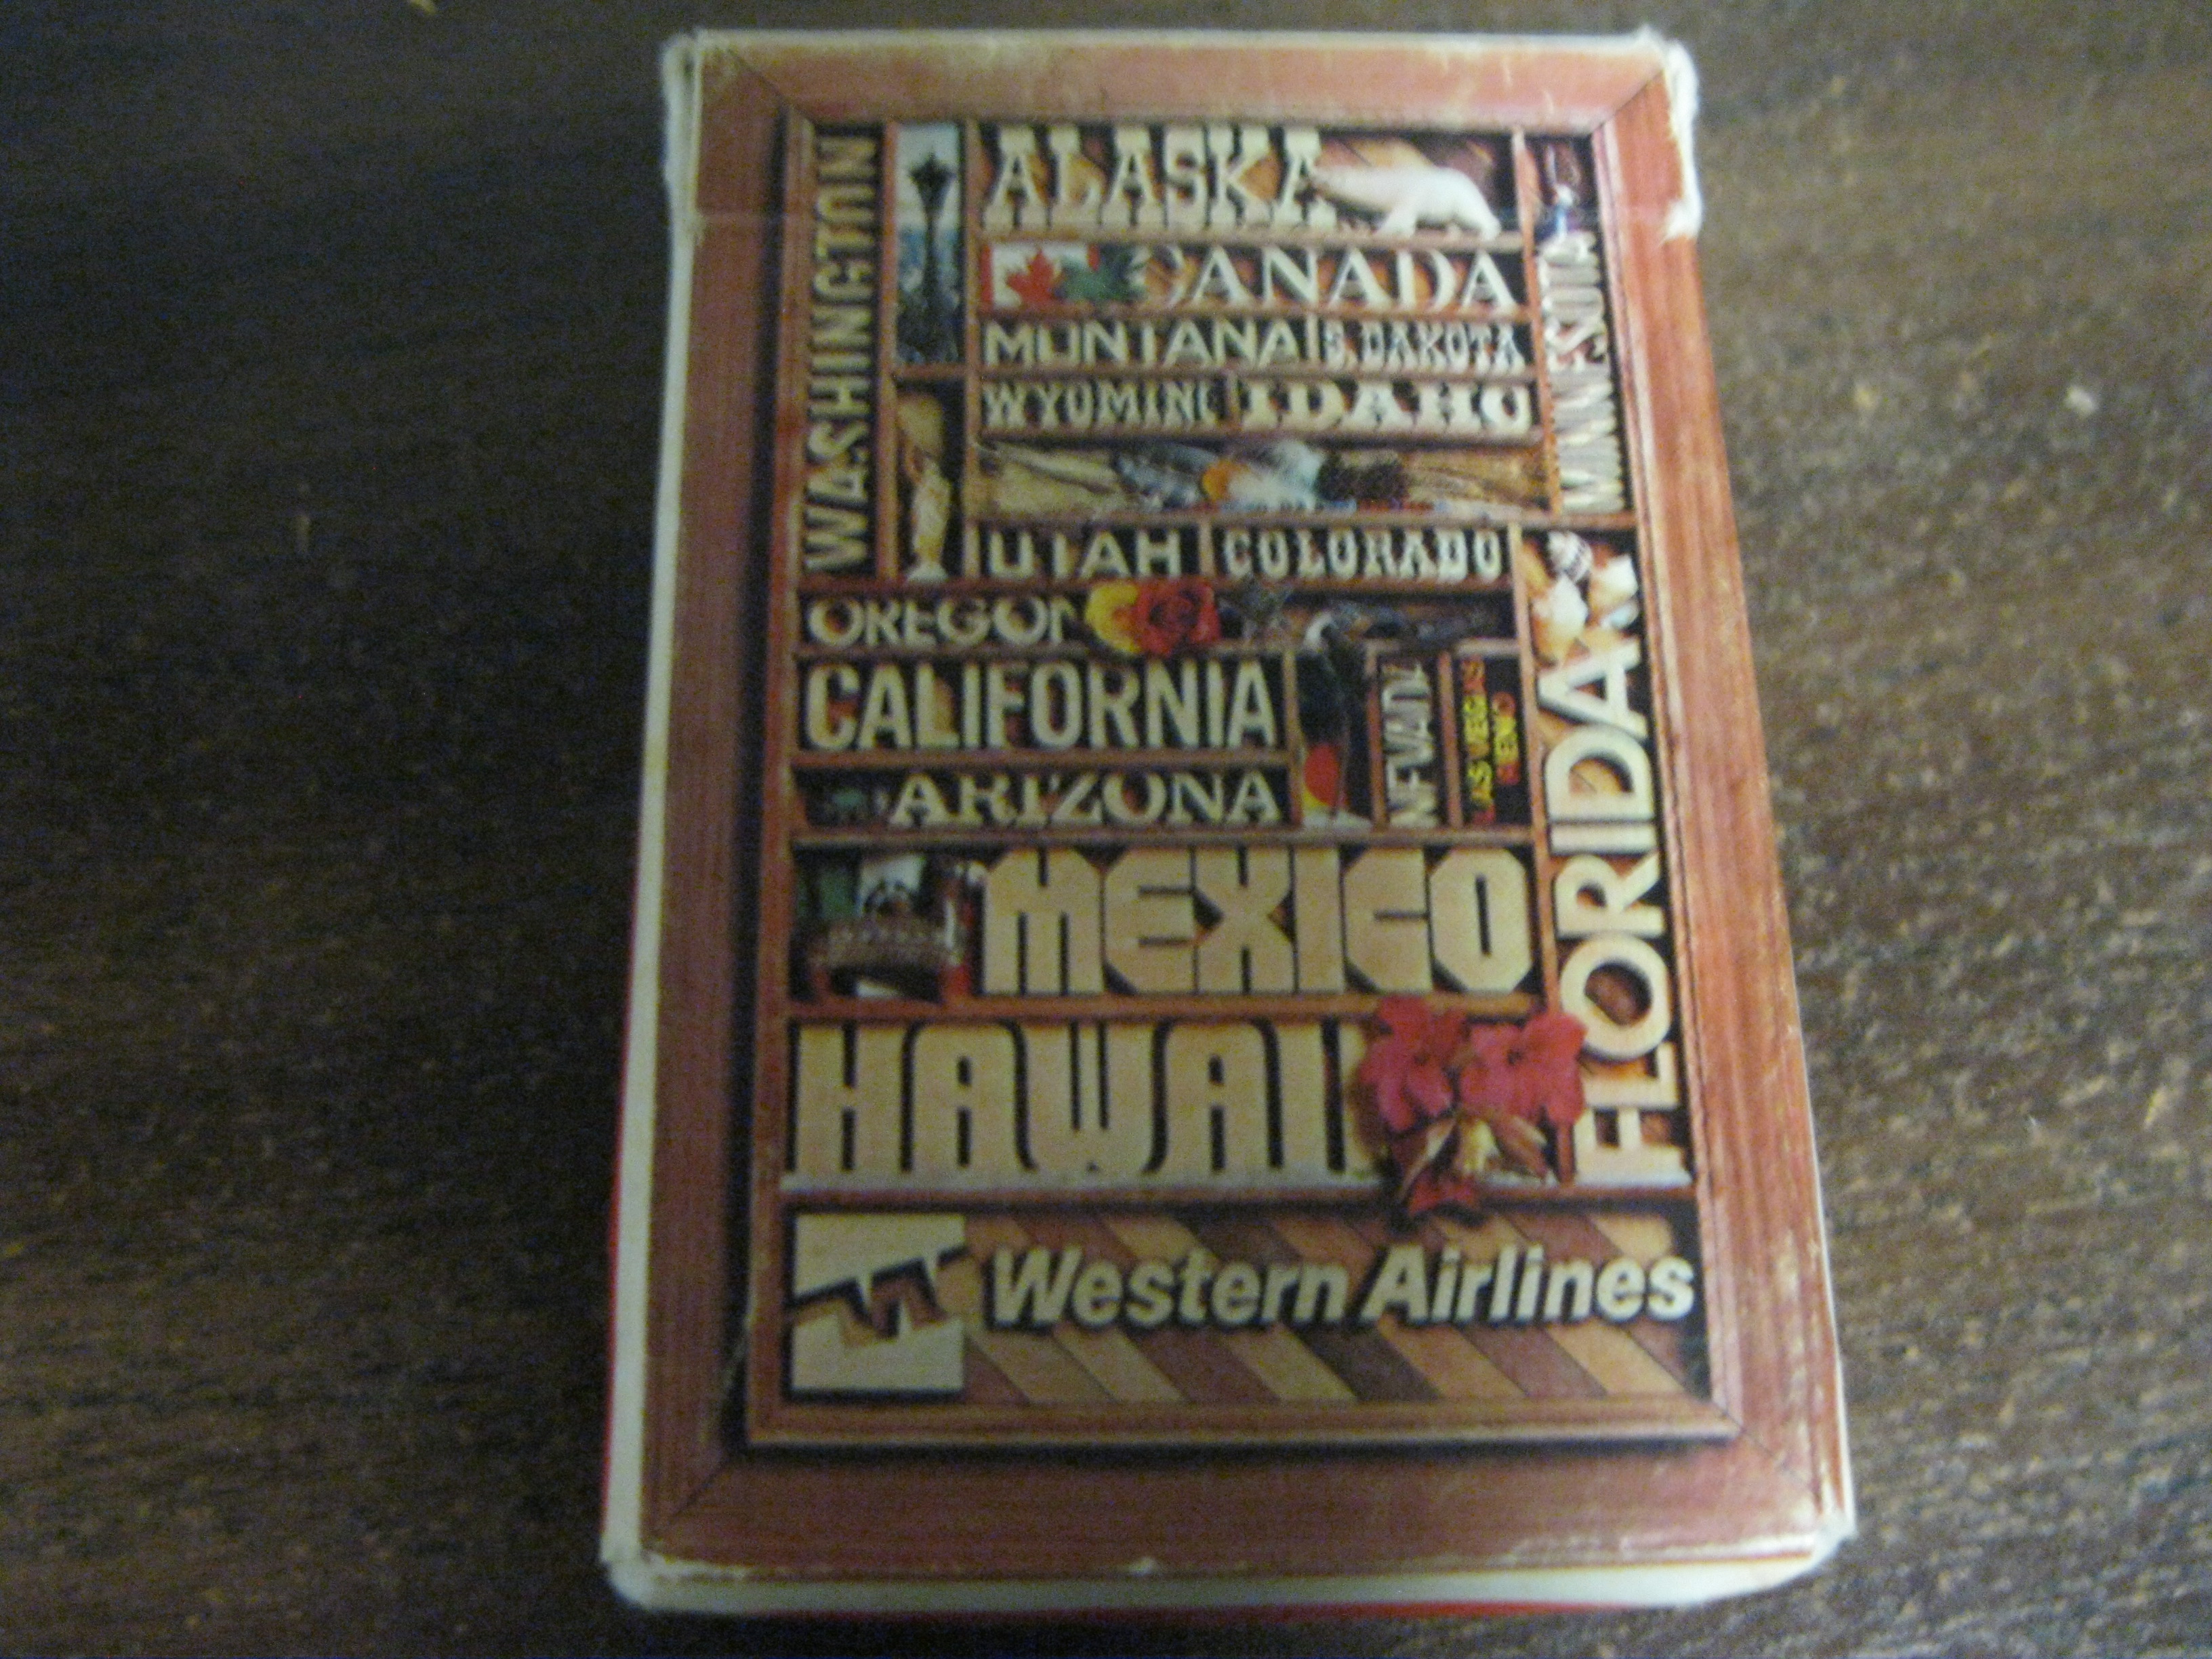 Western Airlines playing card deck